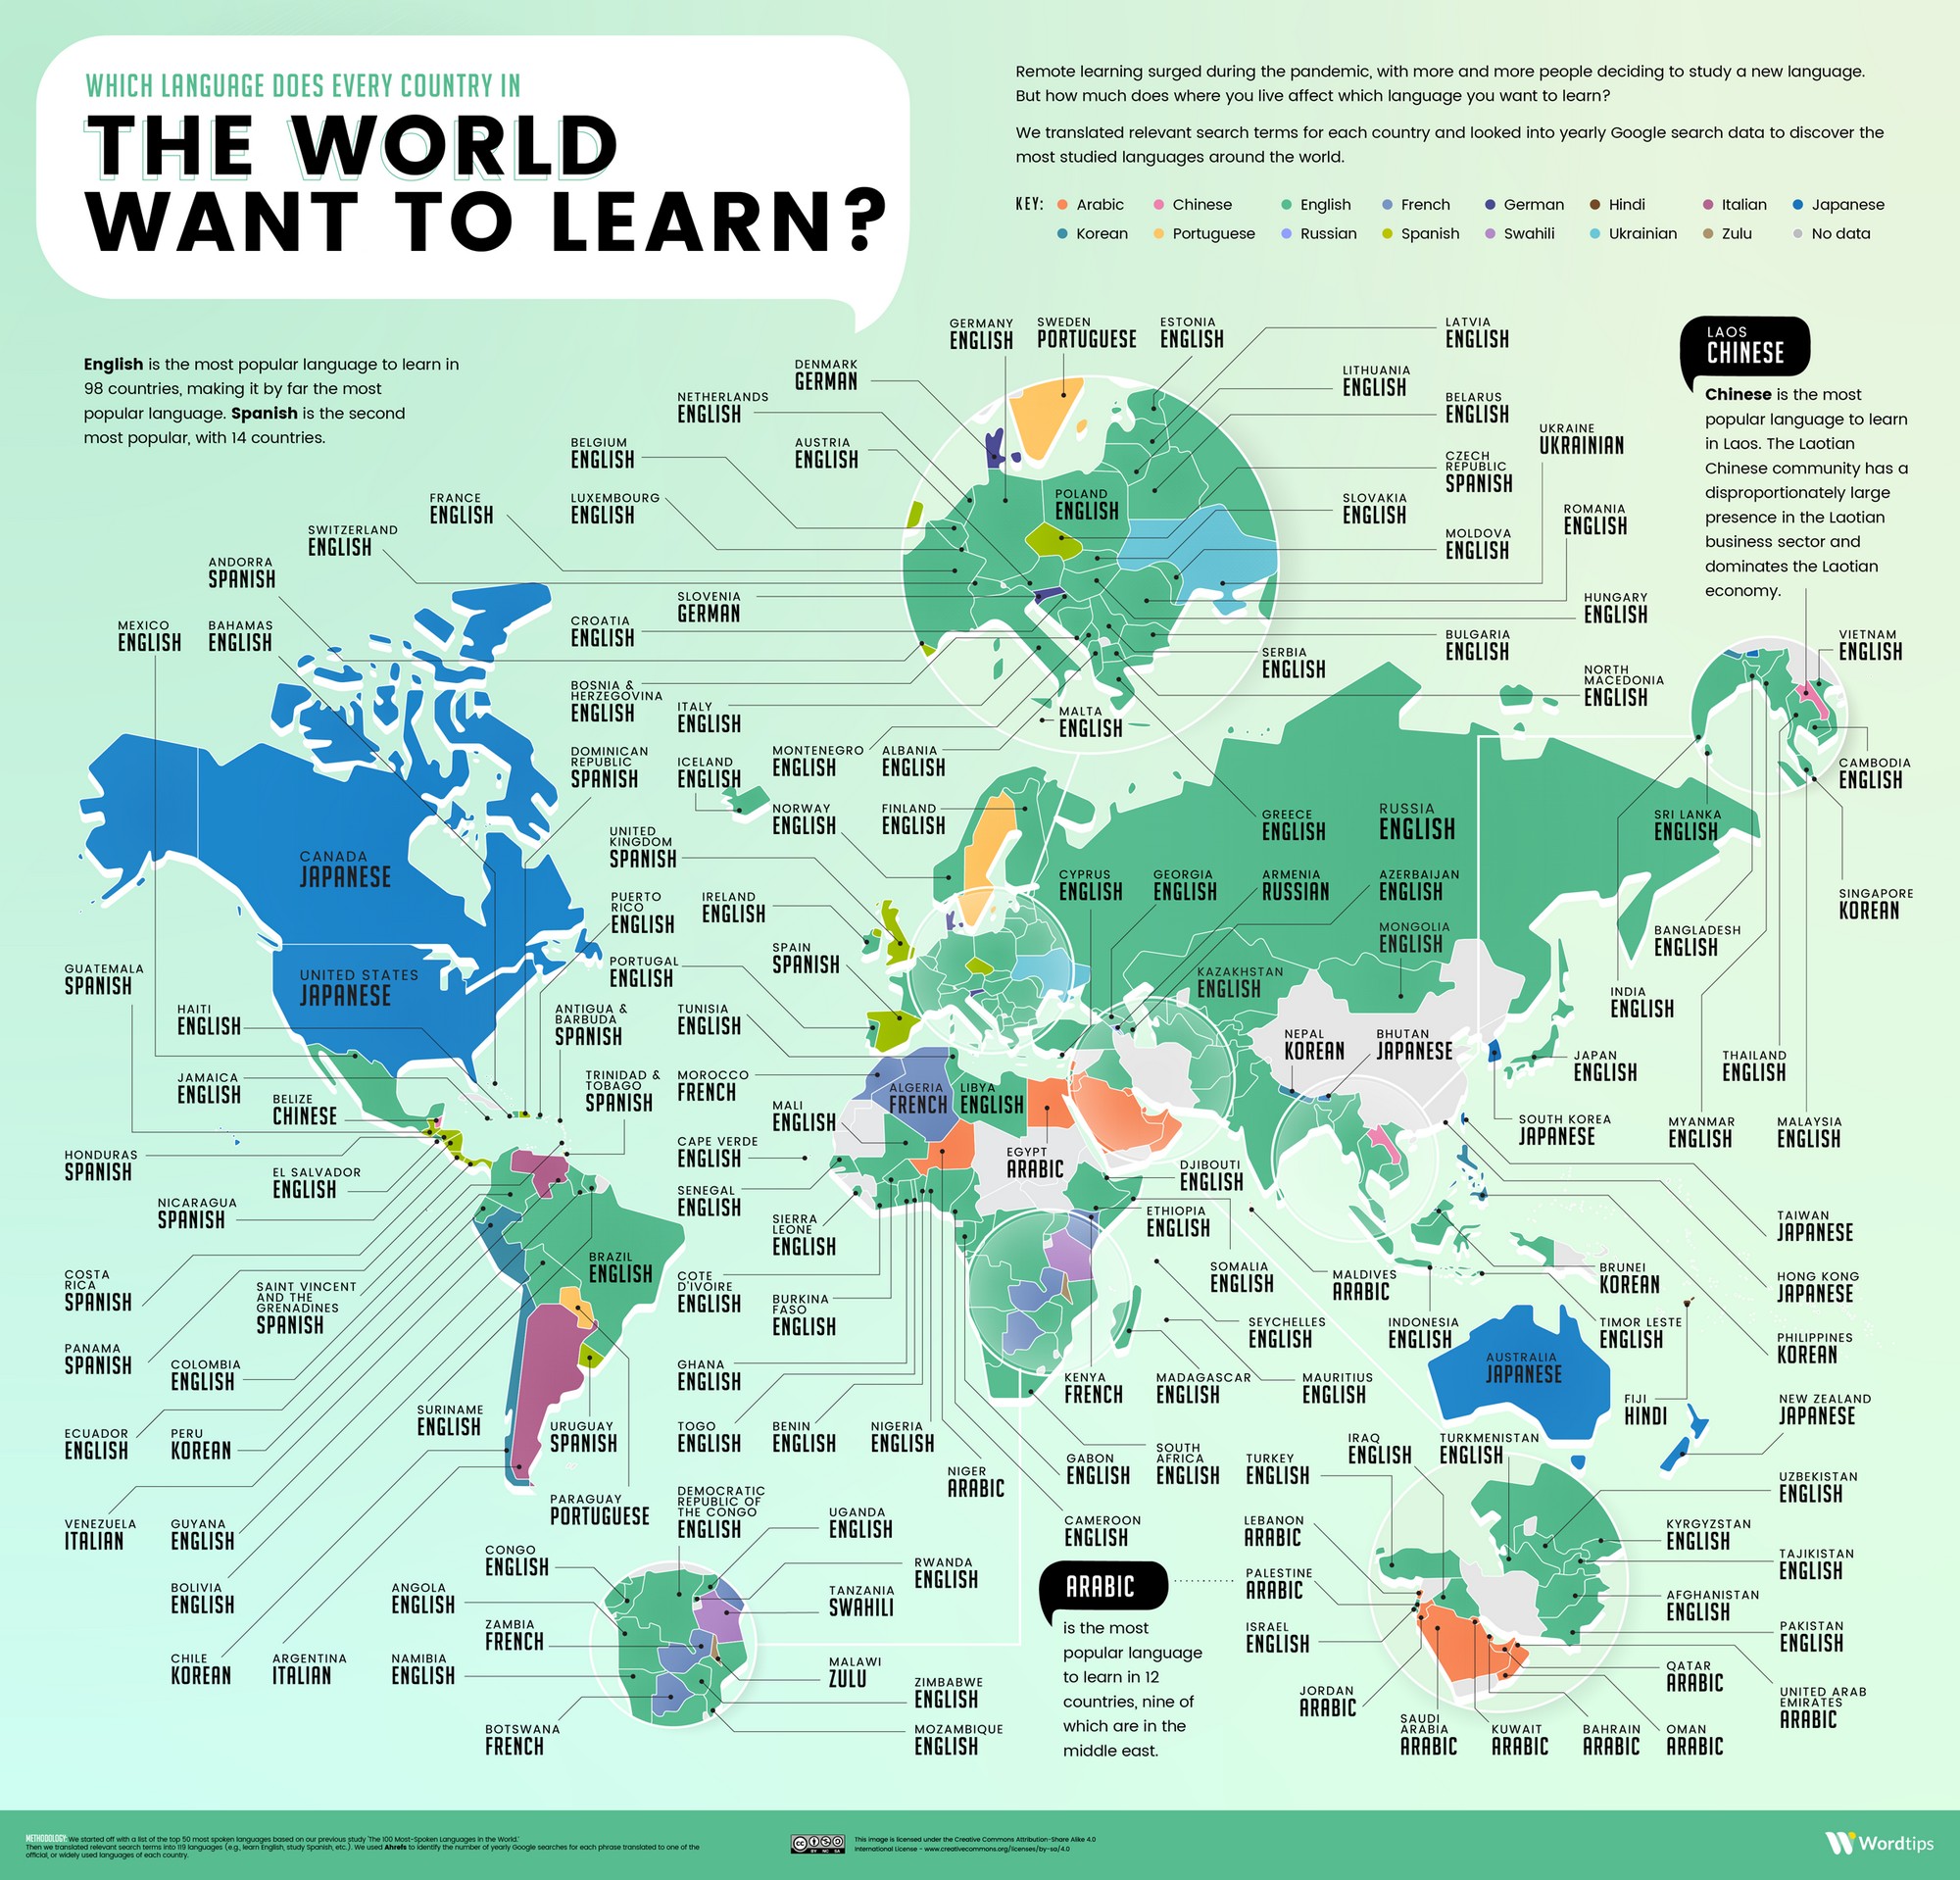 Which language does every country want to learn? LaptrinhX / News